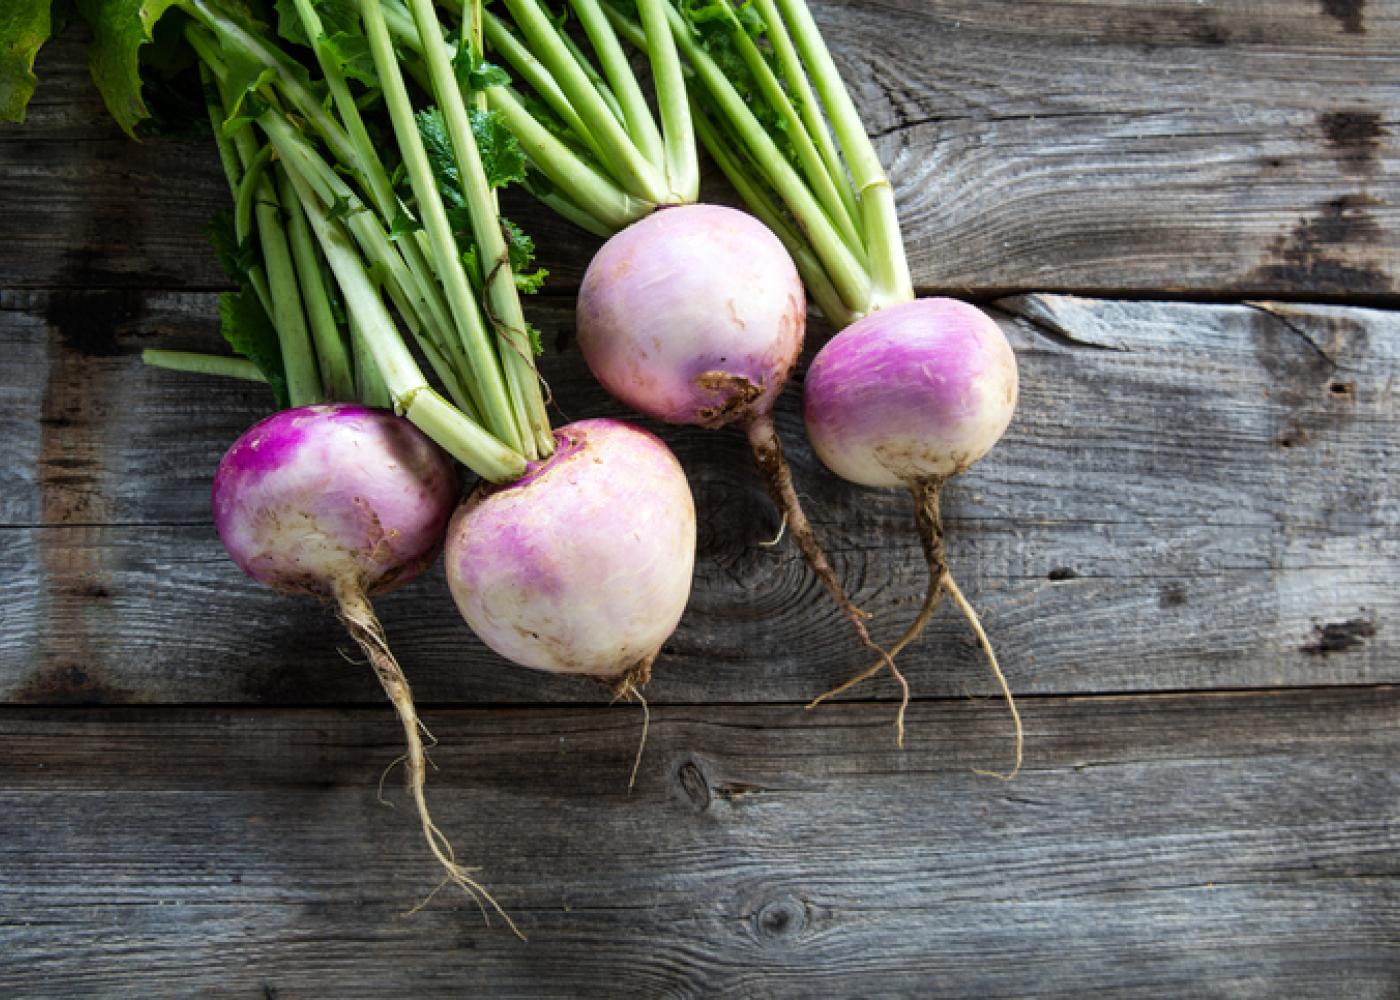 Turnips with green tops